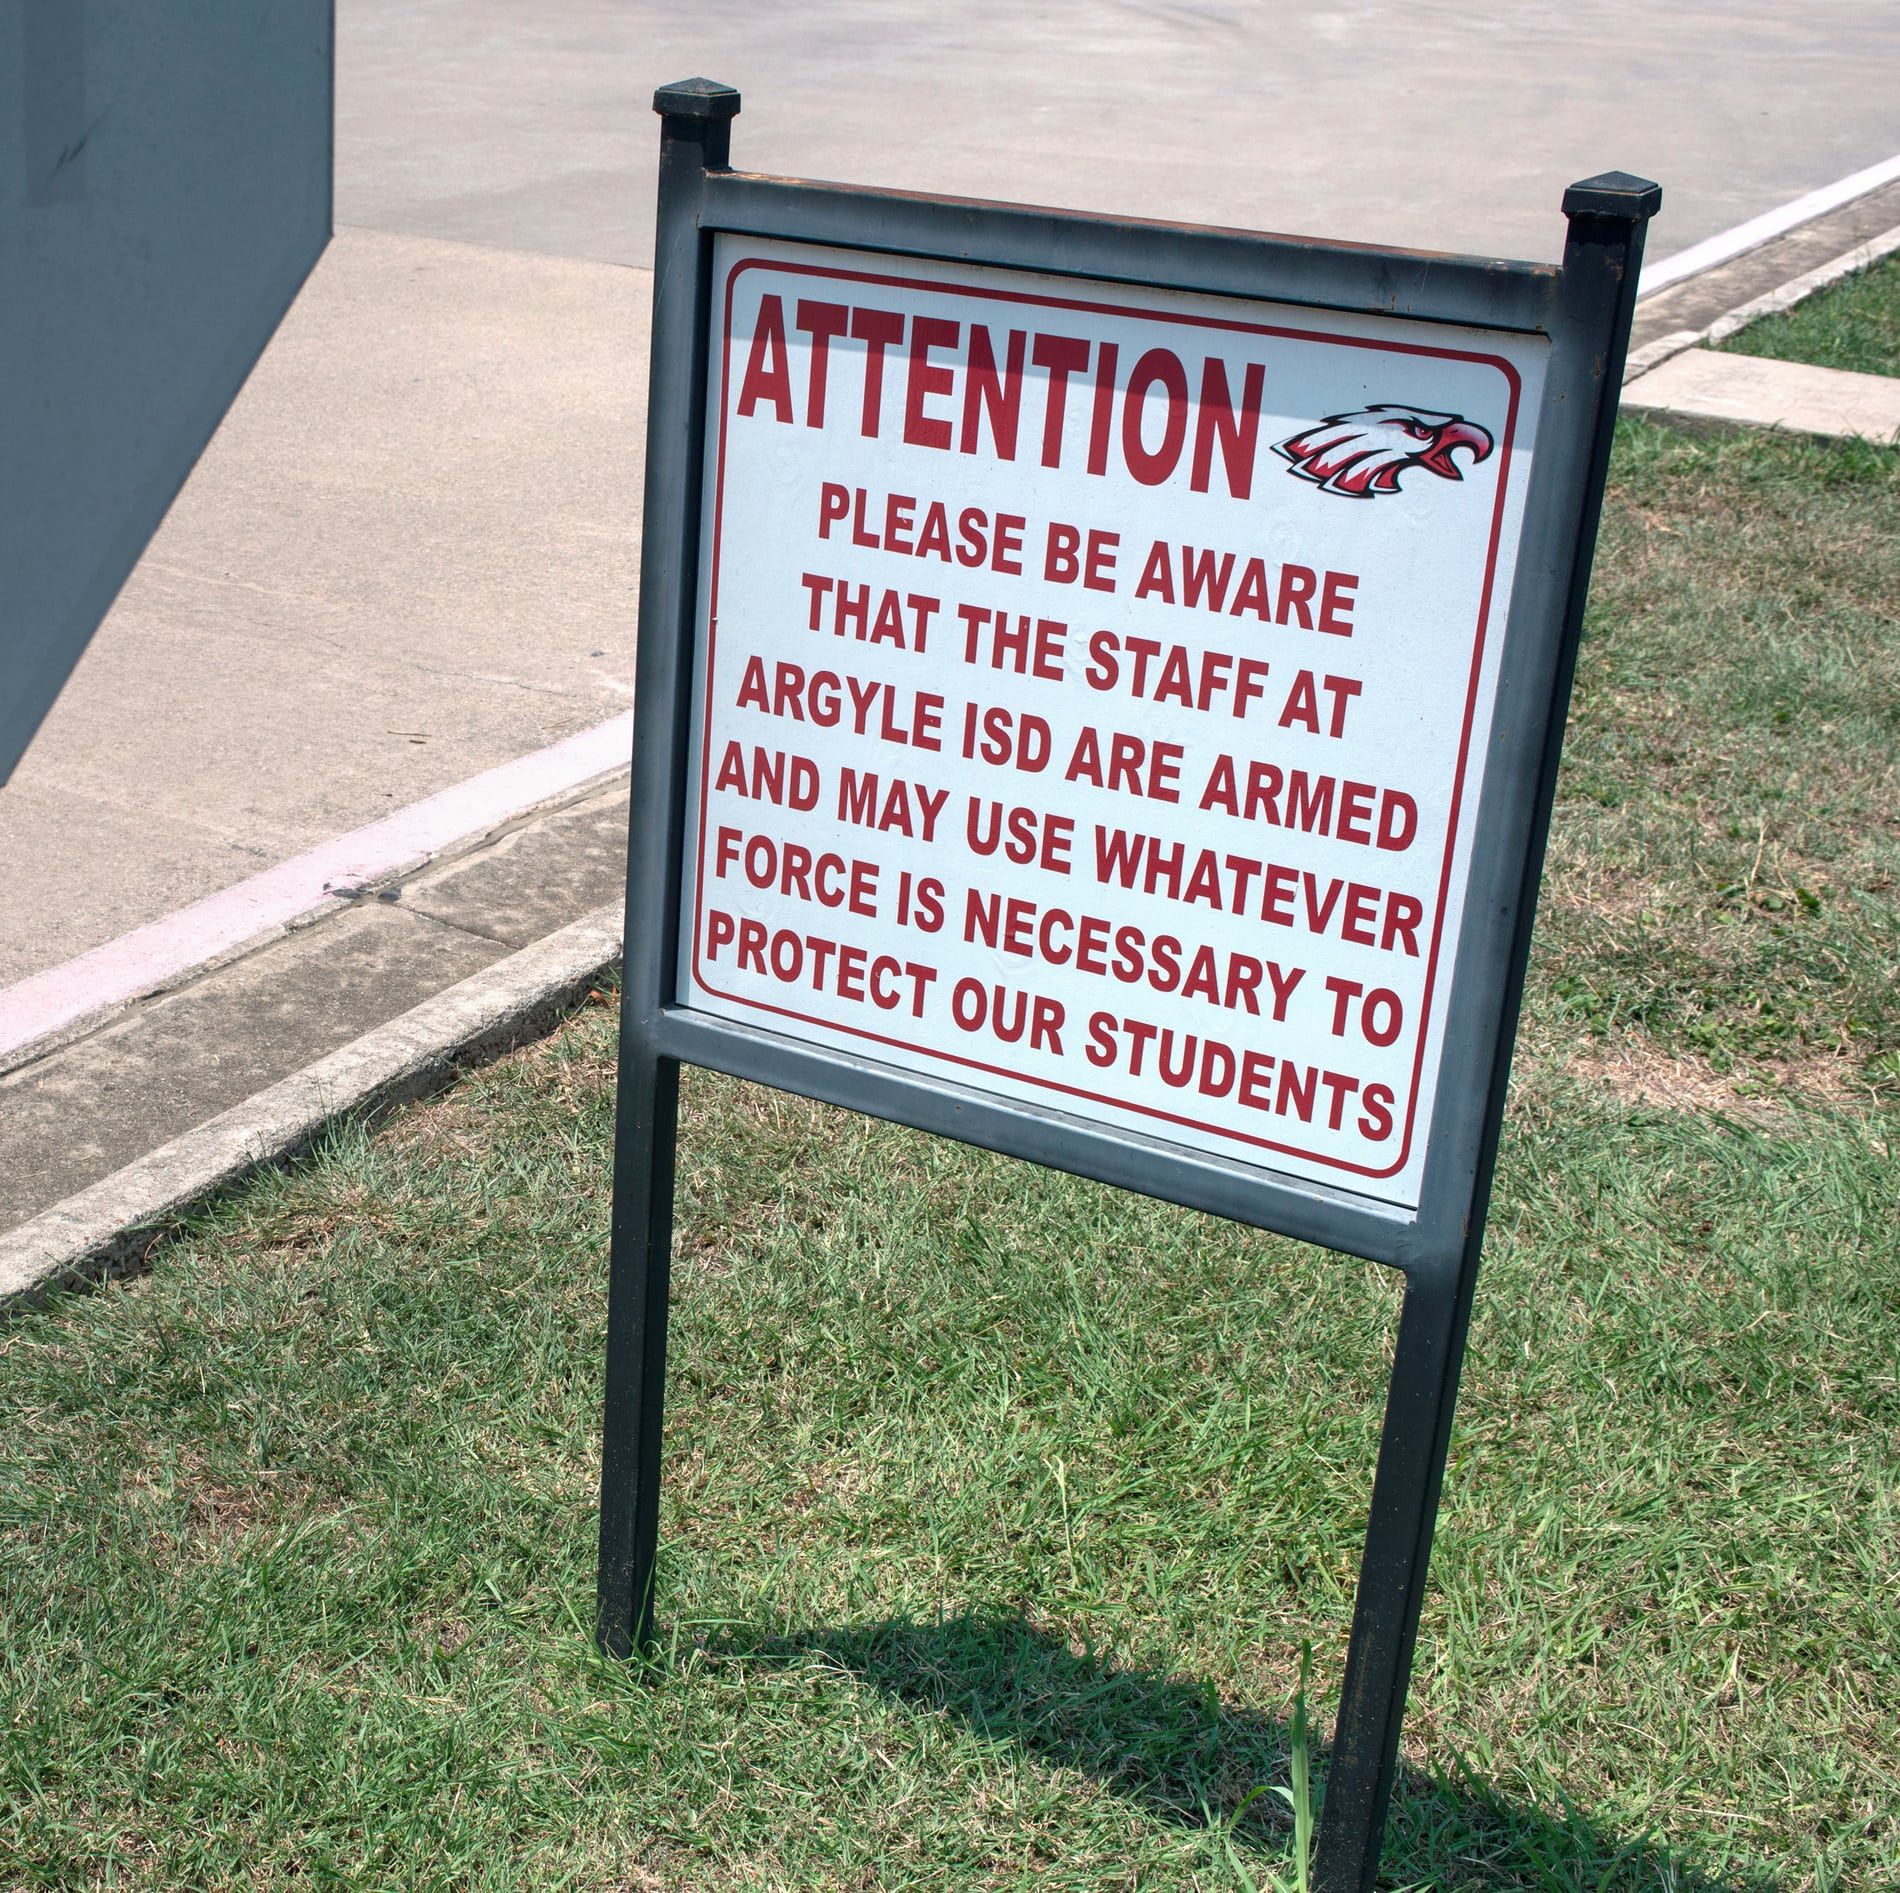 Sign warns that there are armed staff members at Texas school. Image by Spike Johnson. United States, 2018.